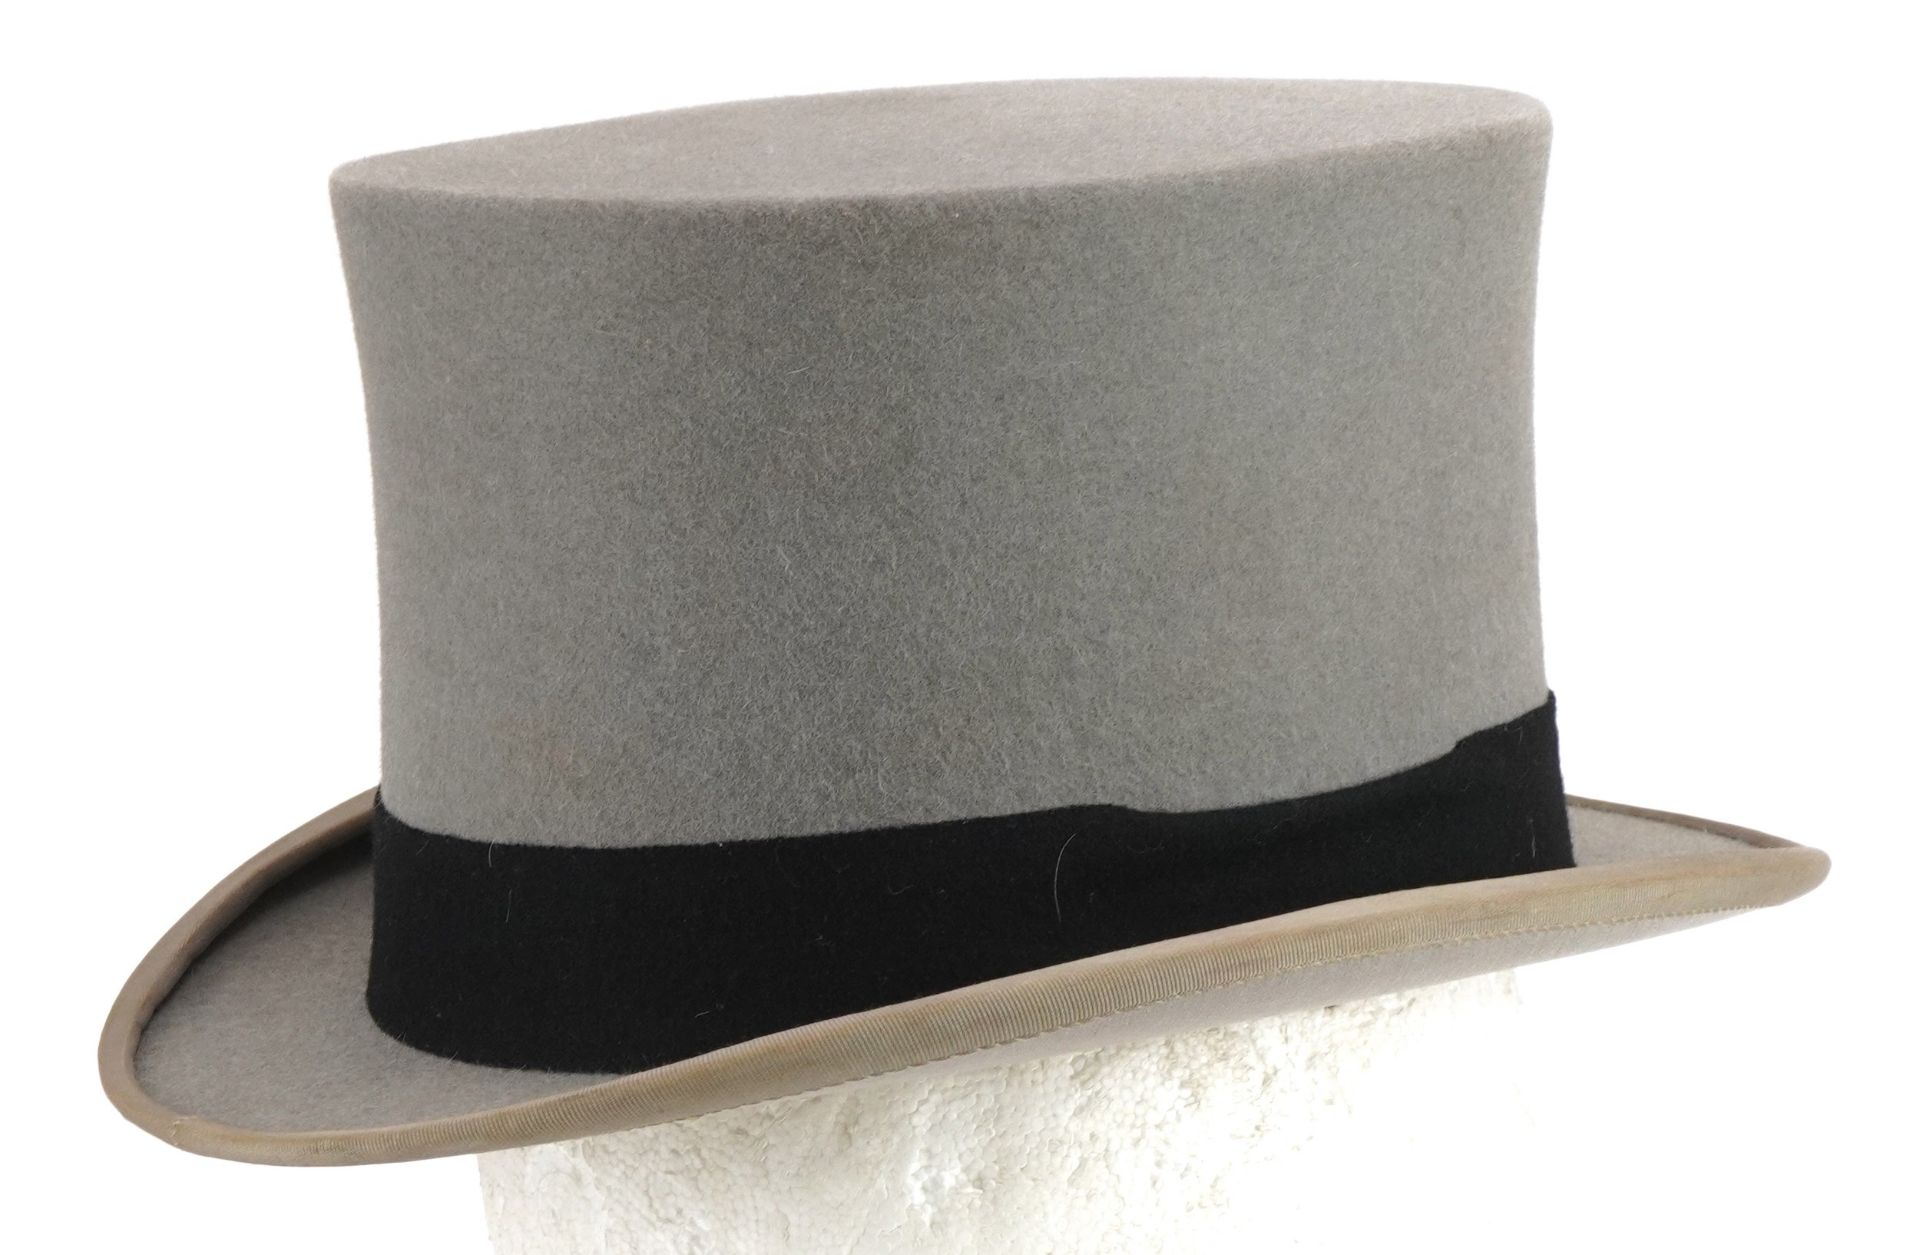 Scott & Co top hat housed in a brown leatherette travel box, the top hat interior size 21cm x 17cm : - Image 6 of 7